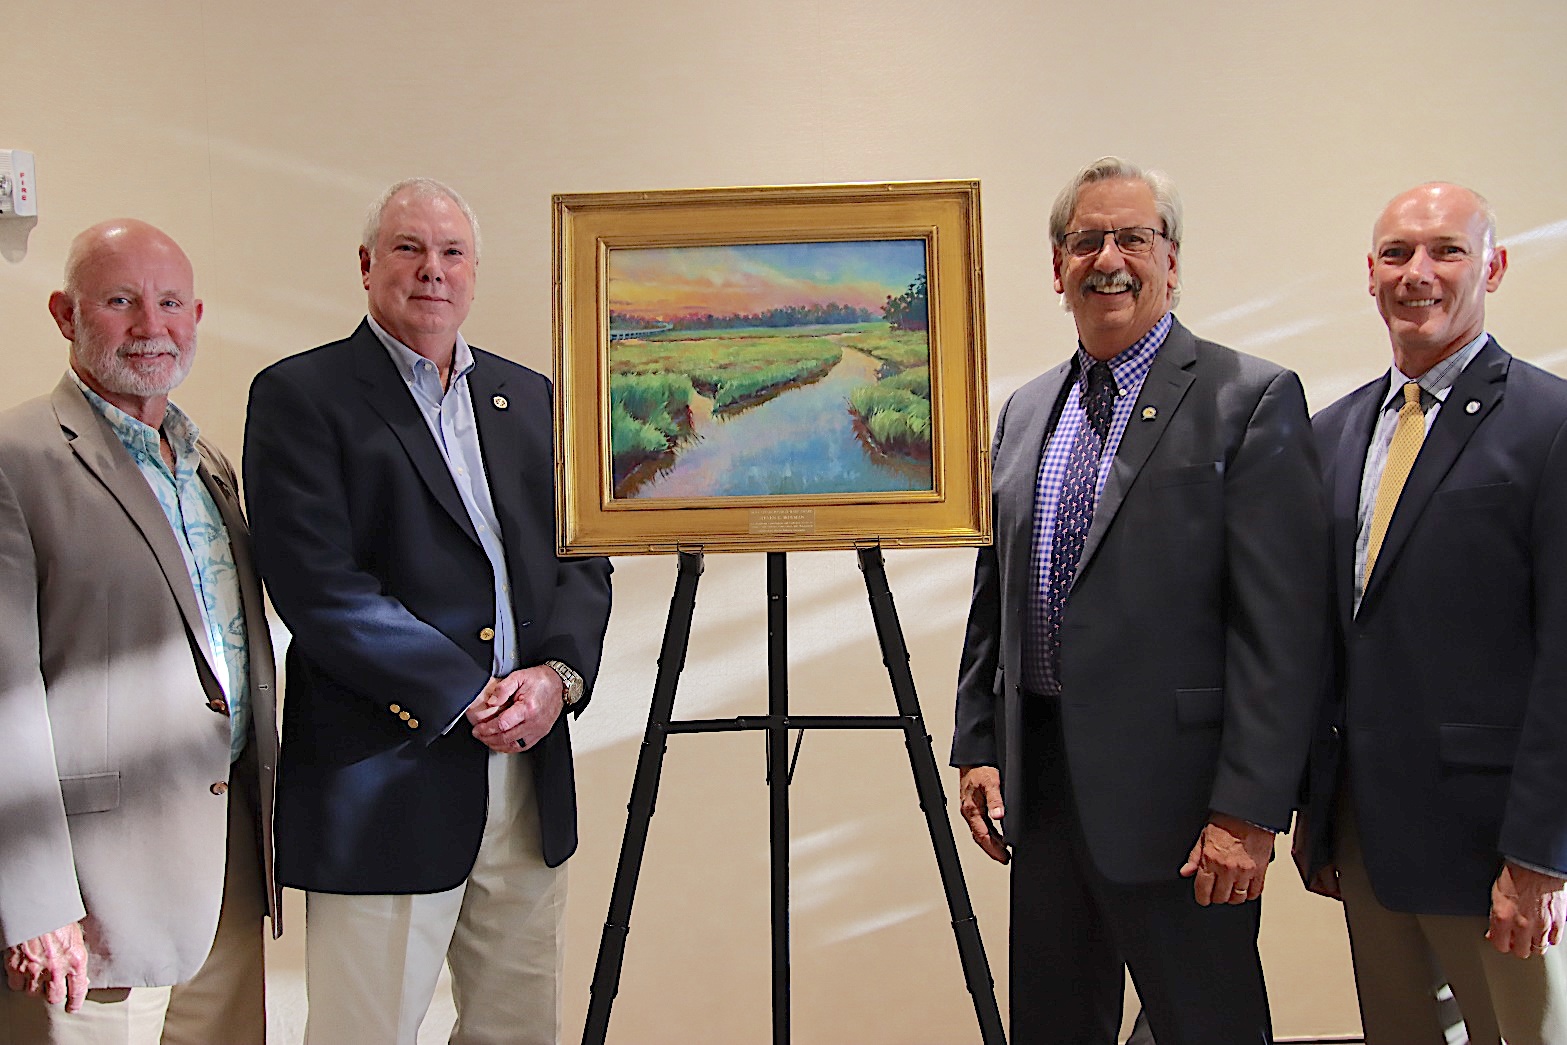 Former Va. Marine Resources Leader Honored for Fisheries Contributions